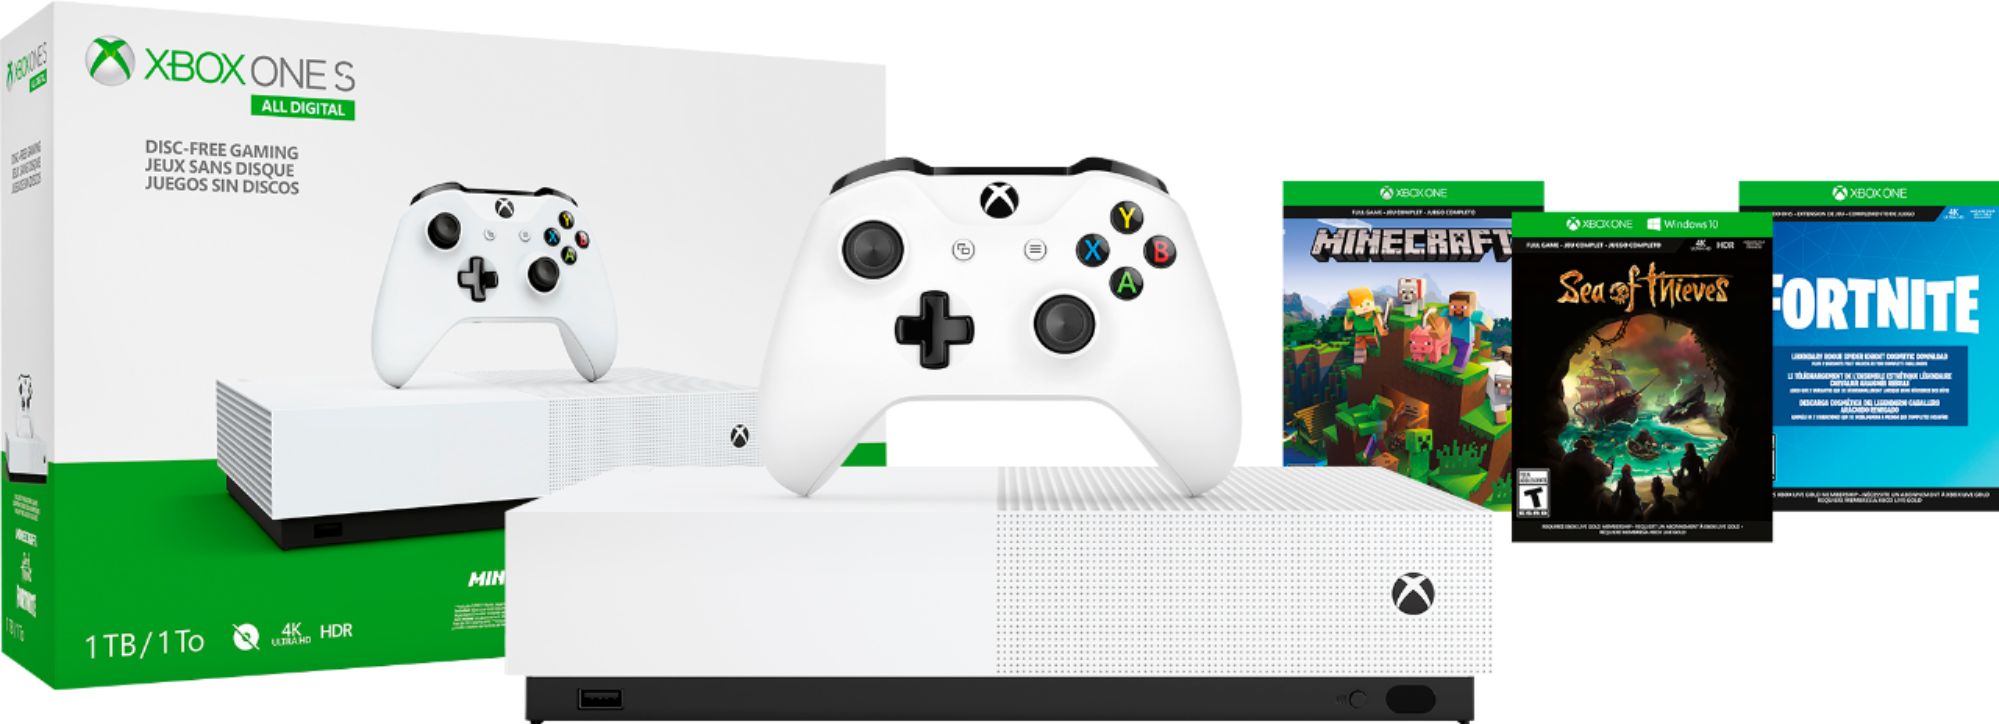 Fortælle Renovering Se venligst Microsoft Xbox One S 1TB All-Digital Edition Console (Disc-free Gaming)  White NJP-00050 - Best Buy